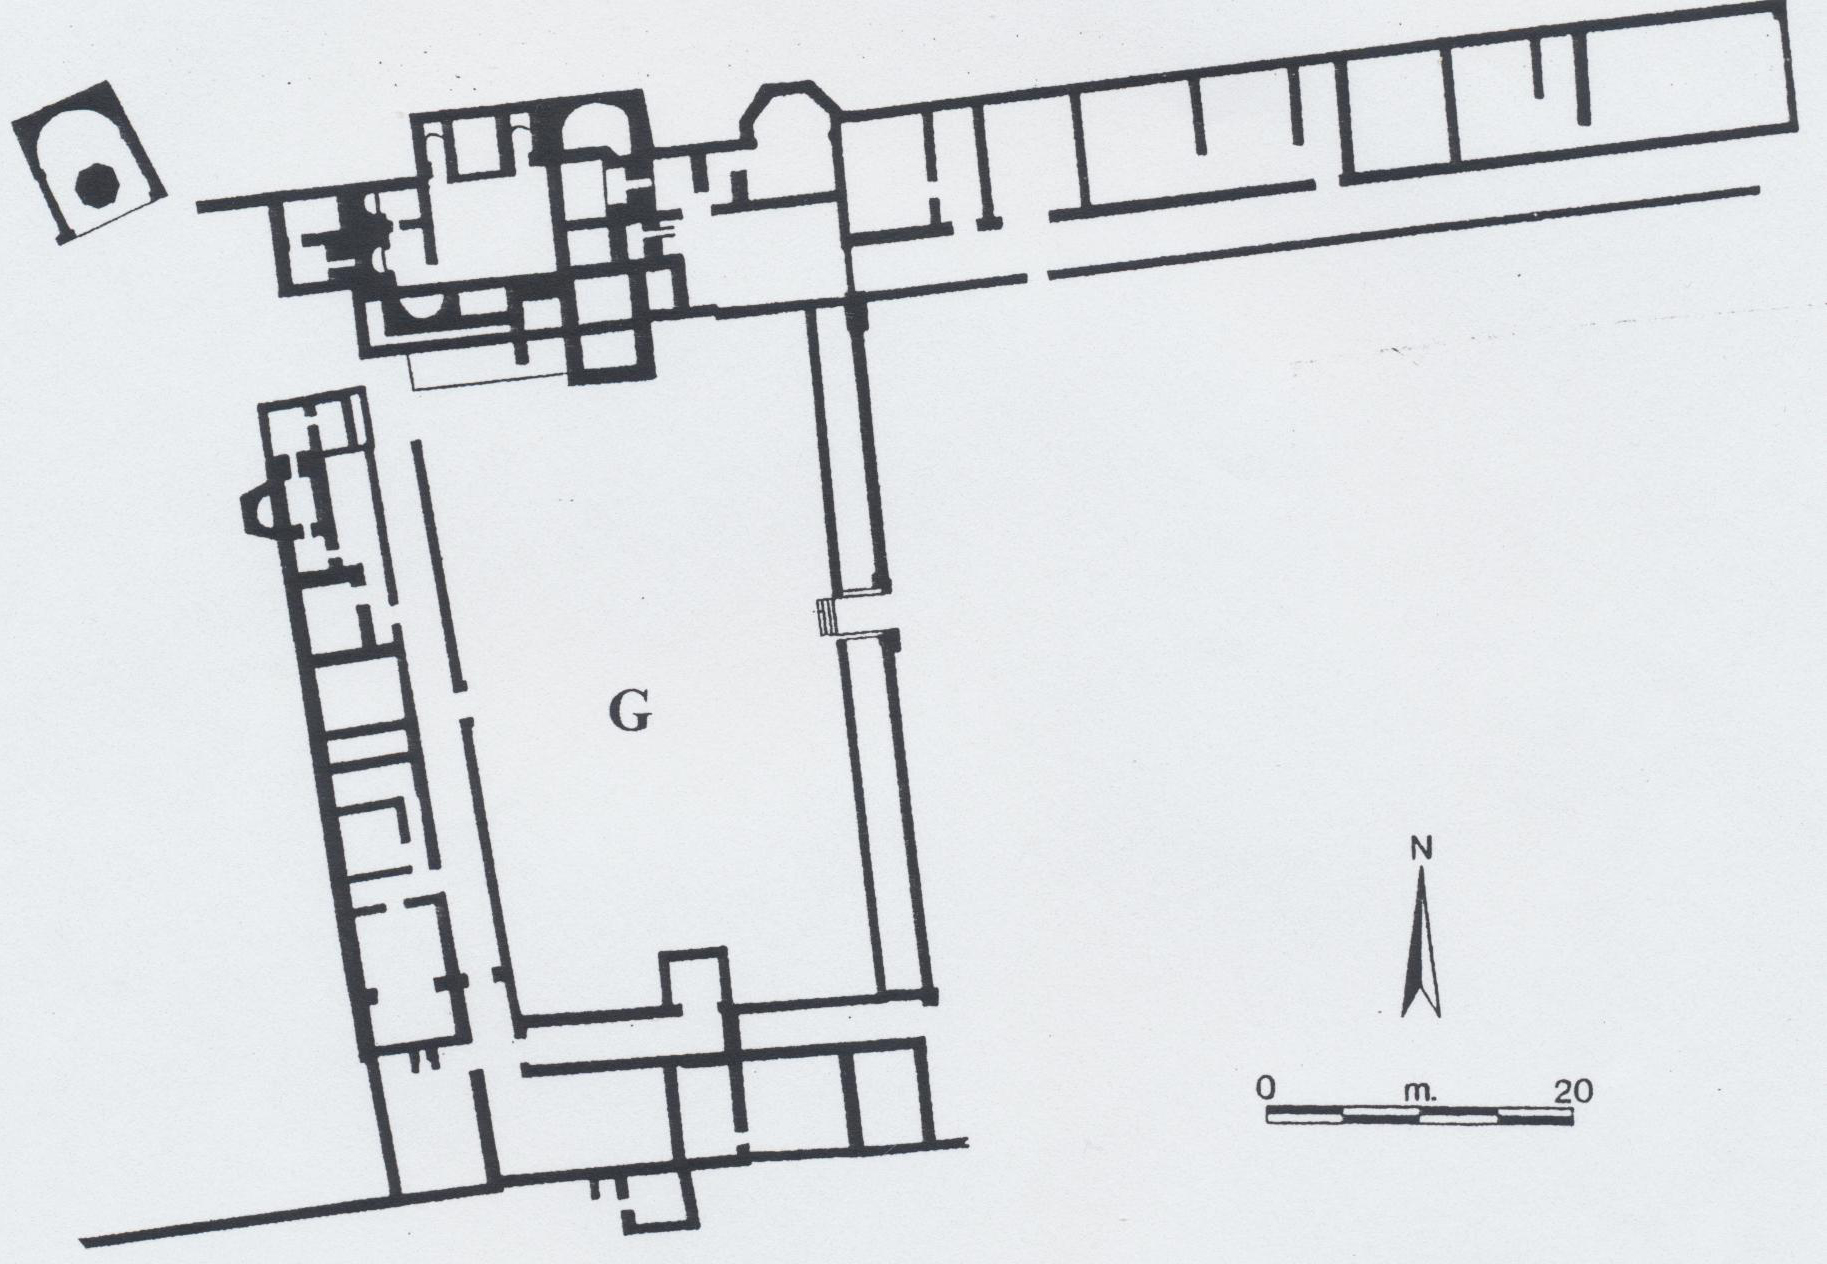 Fig. 1: Plan of the villa and its garden (G) in the courtyard. Plan by M. Carroll and C. Merrony.